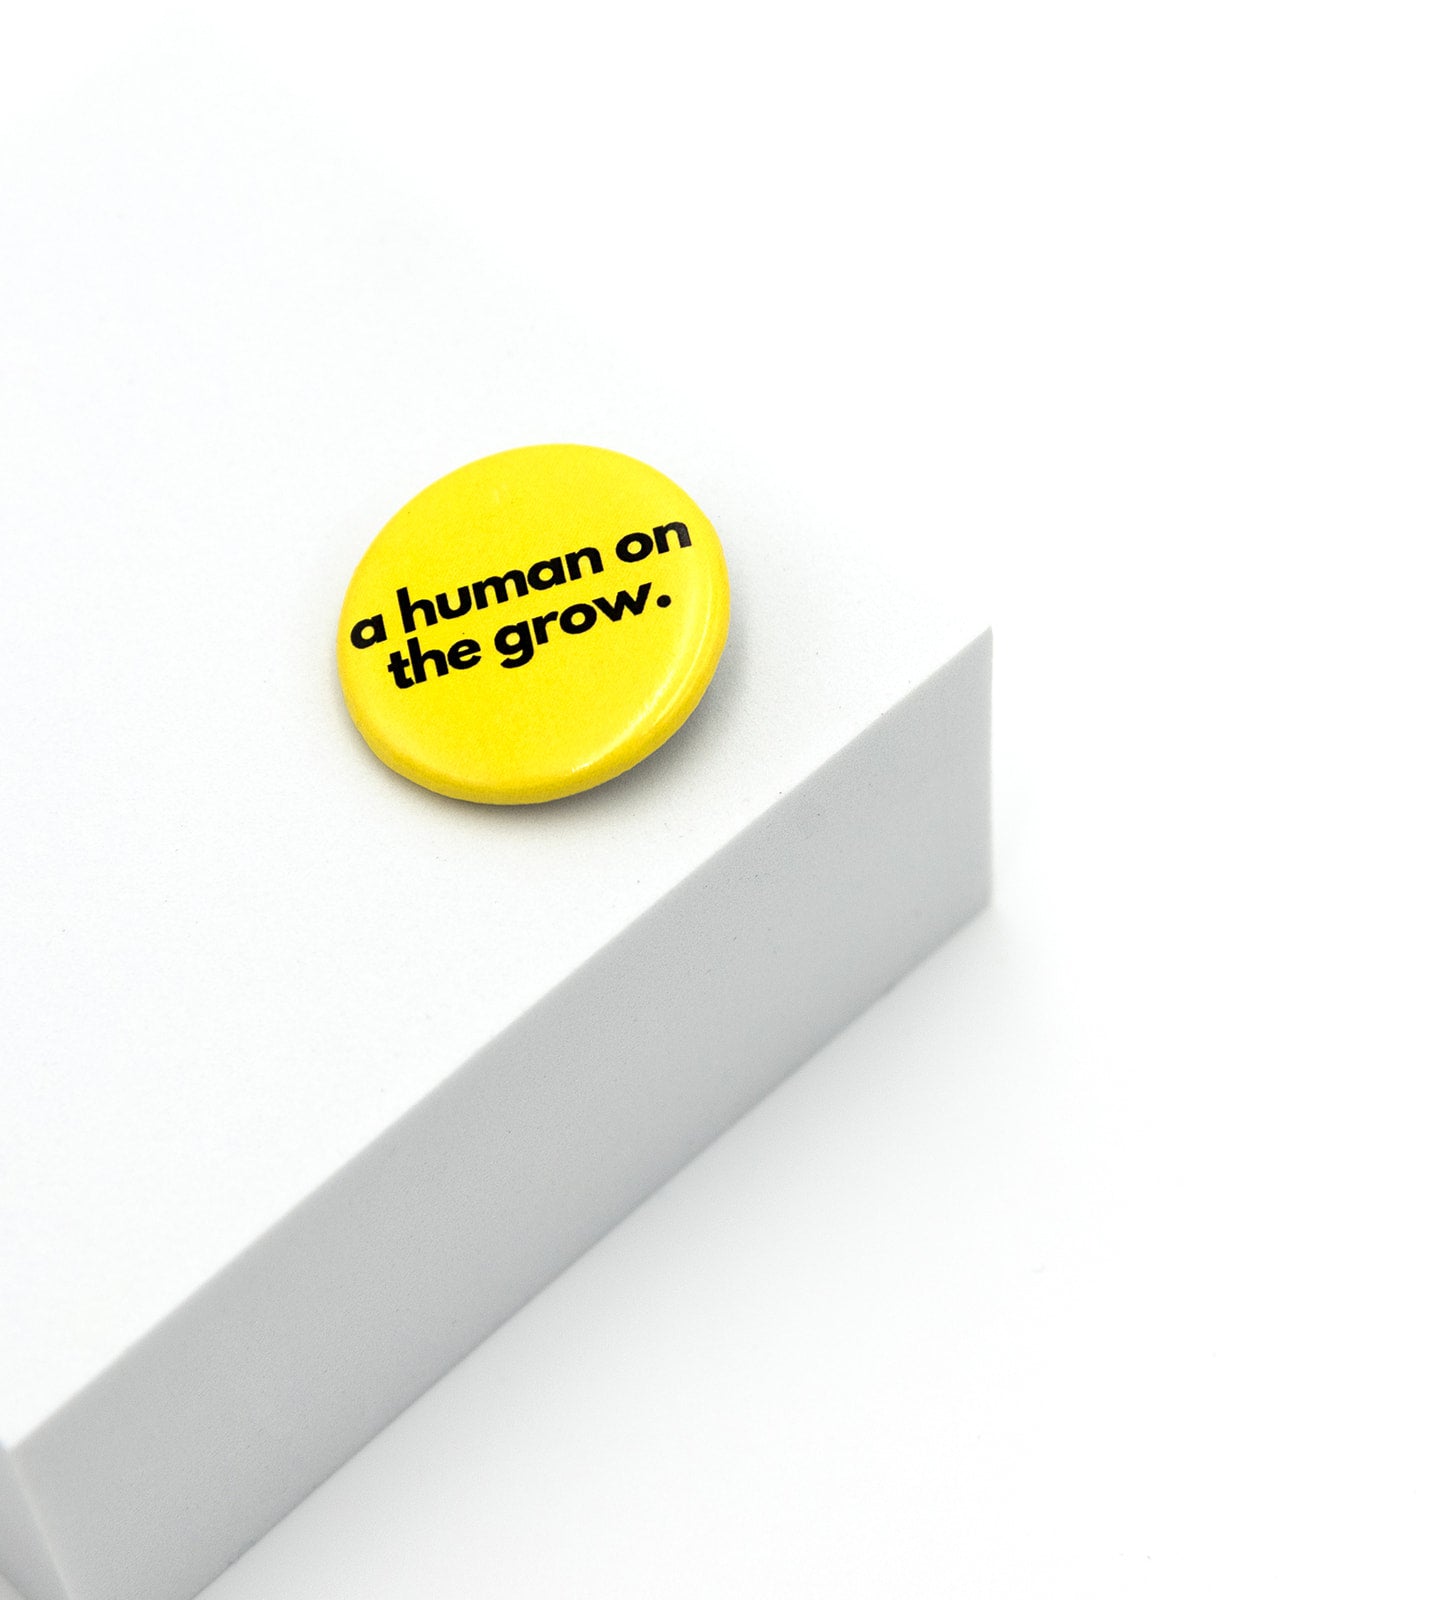 a human on the grow affirmation pin from Sol Rise Essentials yellow and black